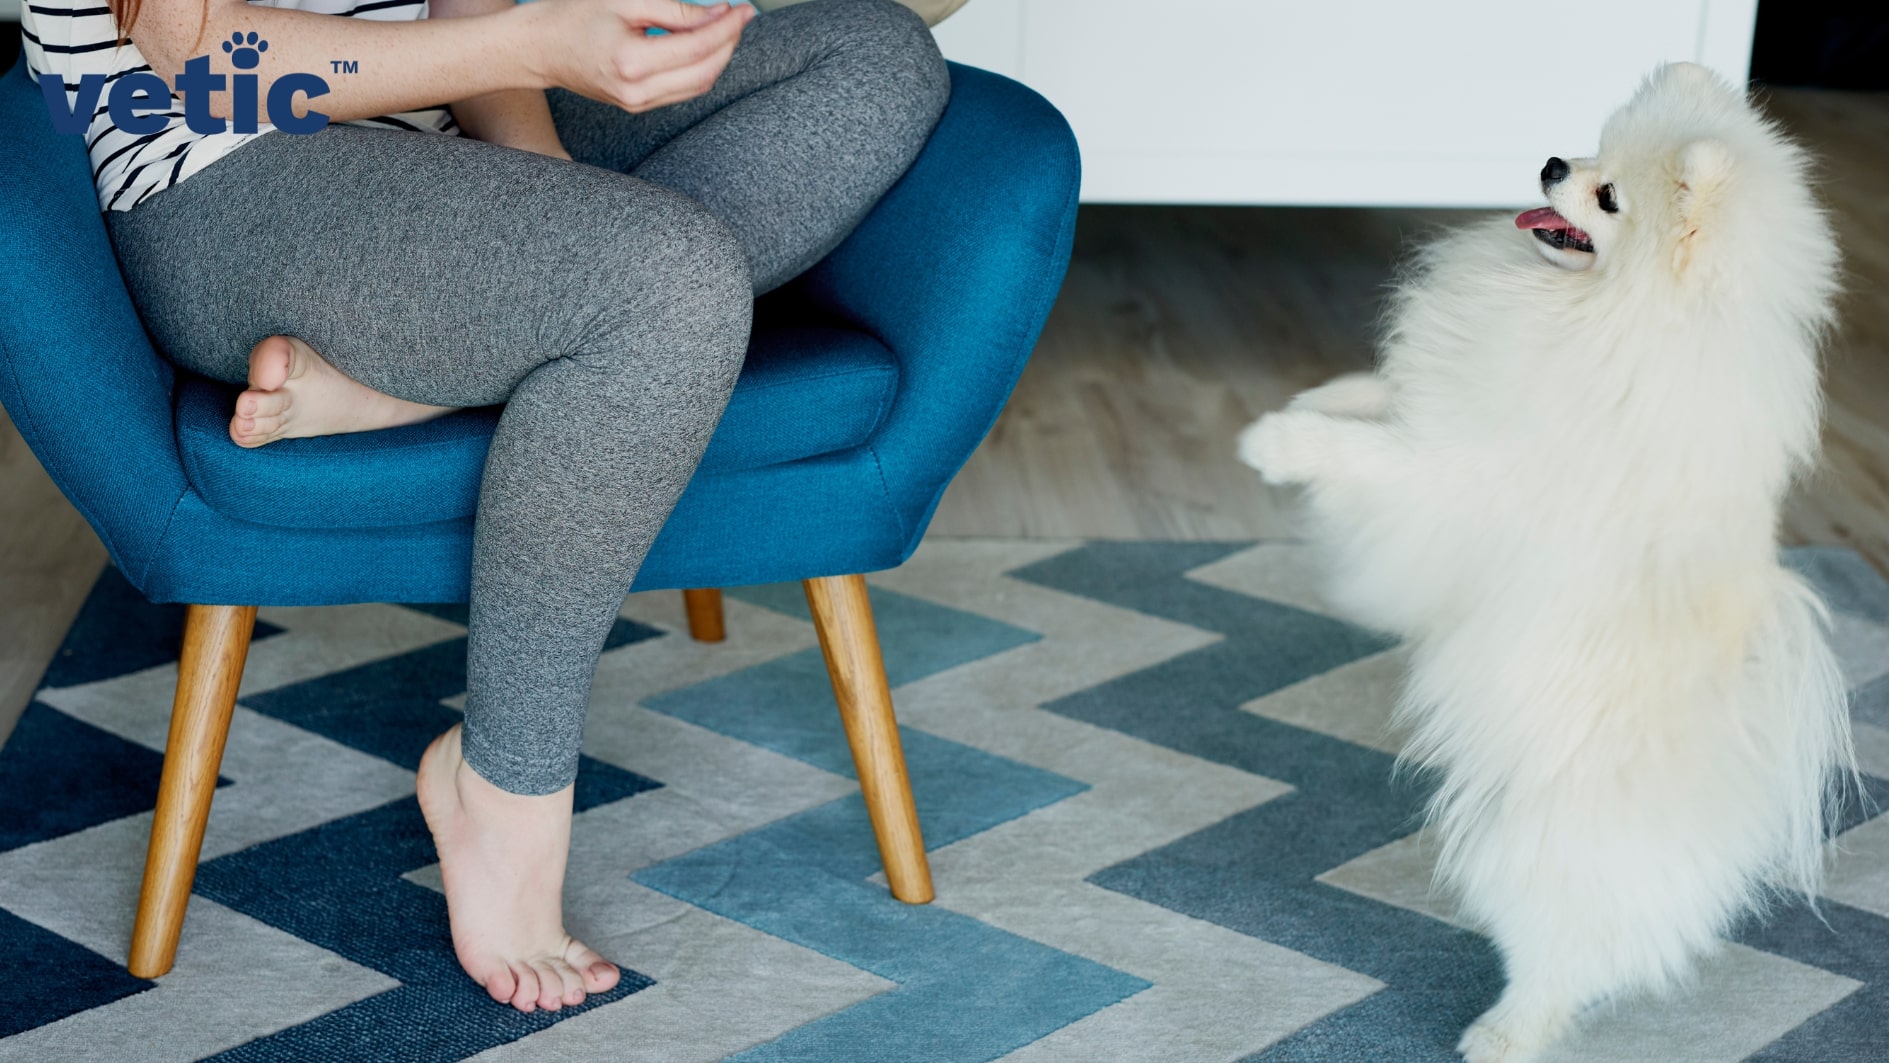 a fully white Pomeranian standing up on the two back legs white a woman holding treats sits on a blue cushioned chair on the left.